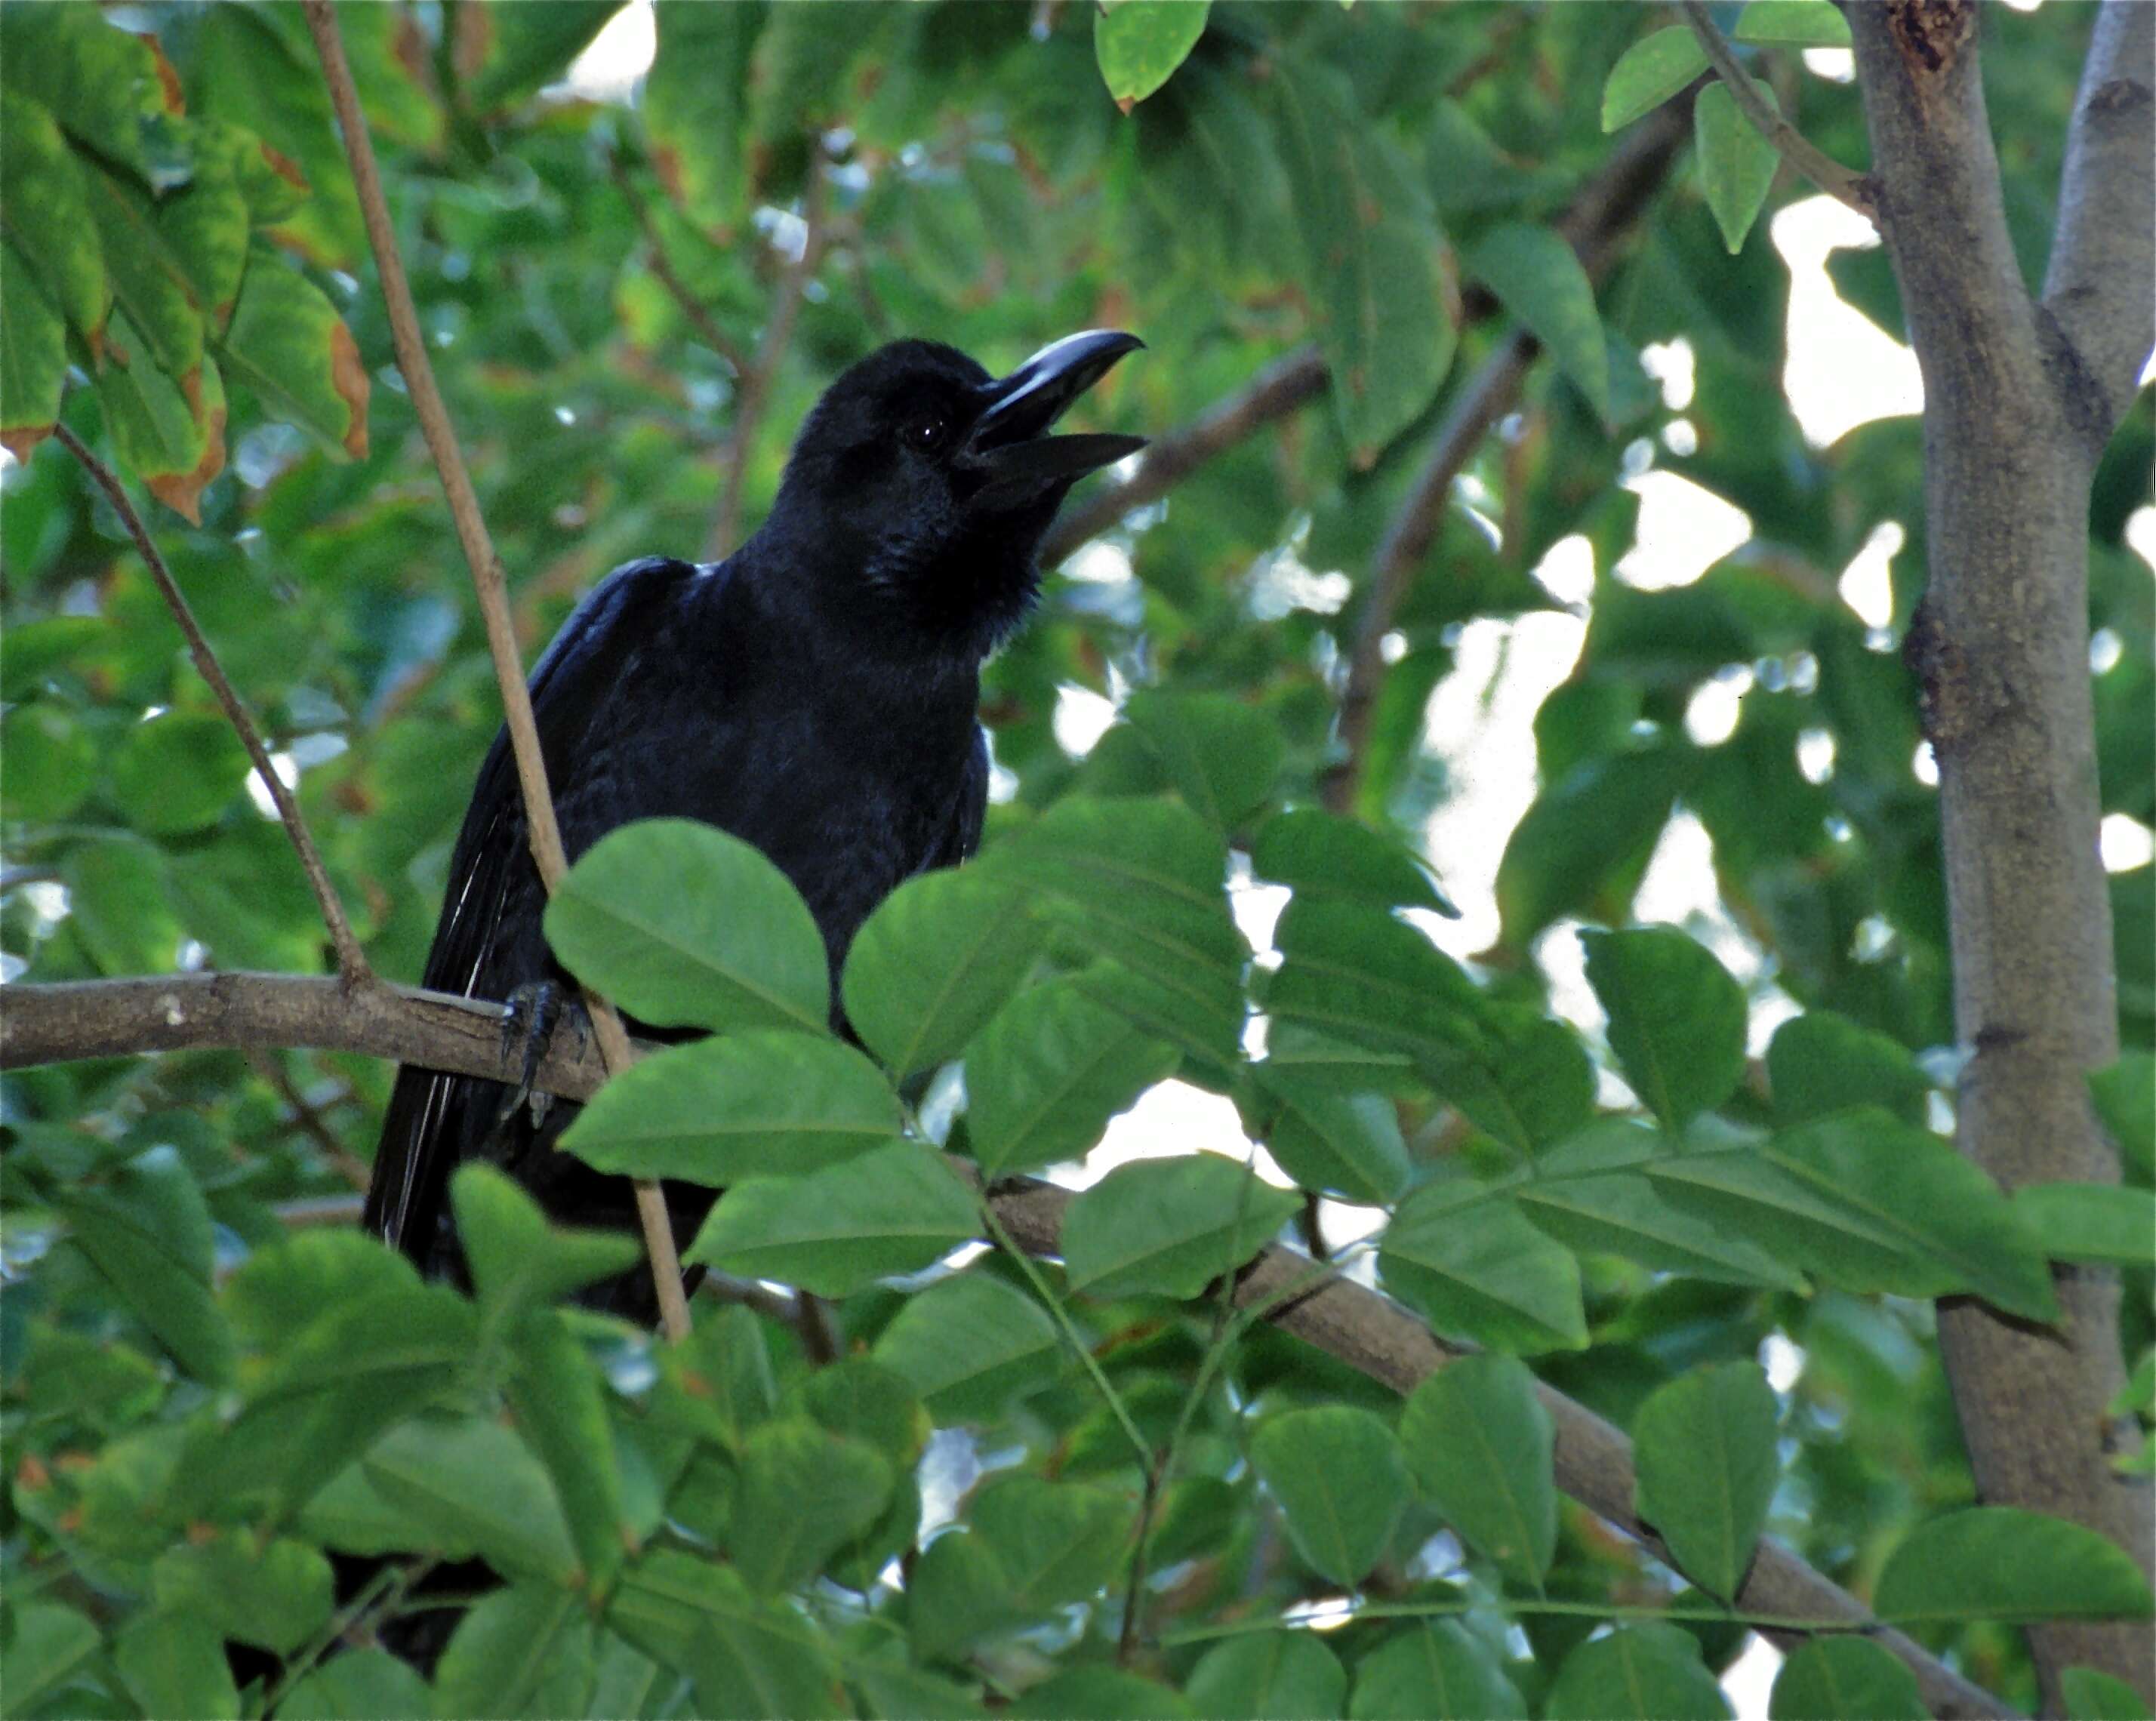 Image of Large-billed Crow